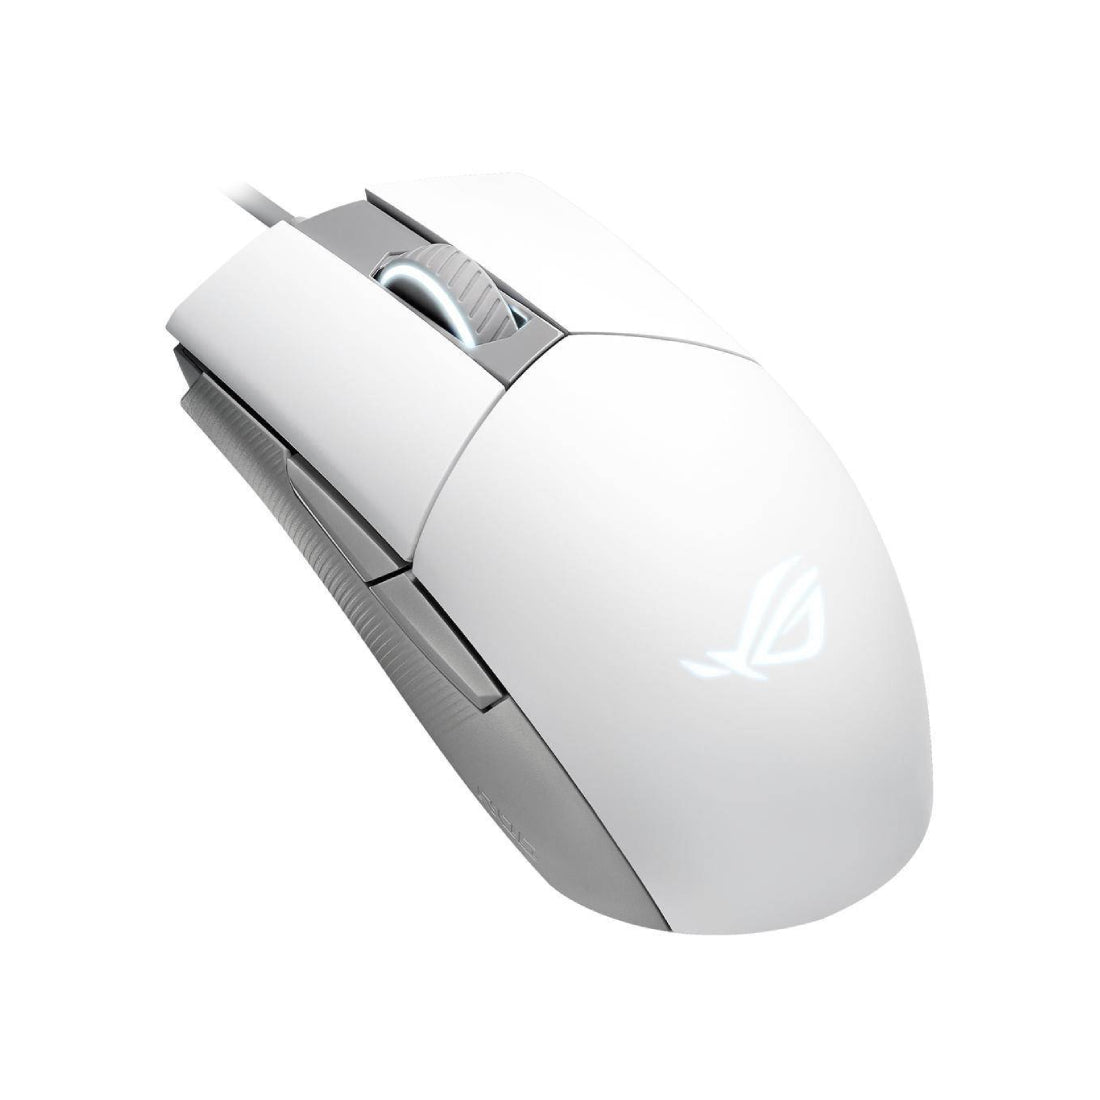 Asus ROG Strix Impact II Moonlight Wired Gaming Mouse - White/ Grey - –  Store 974